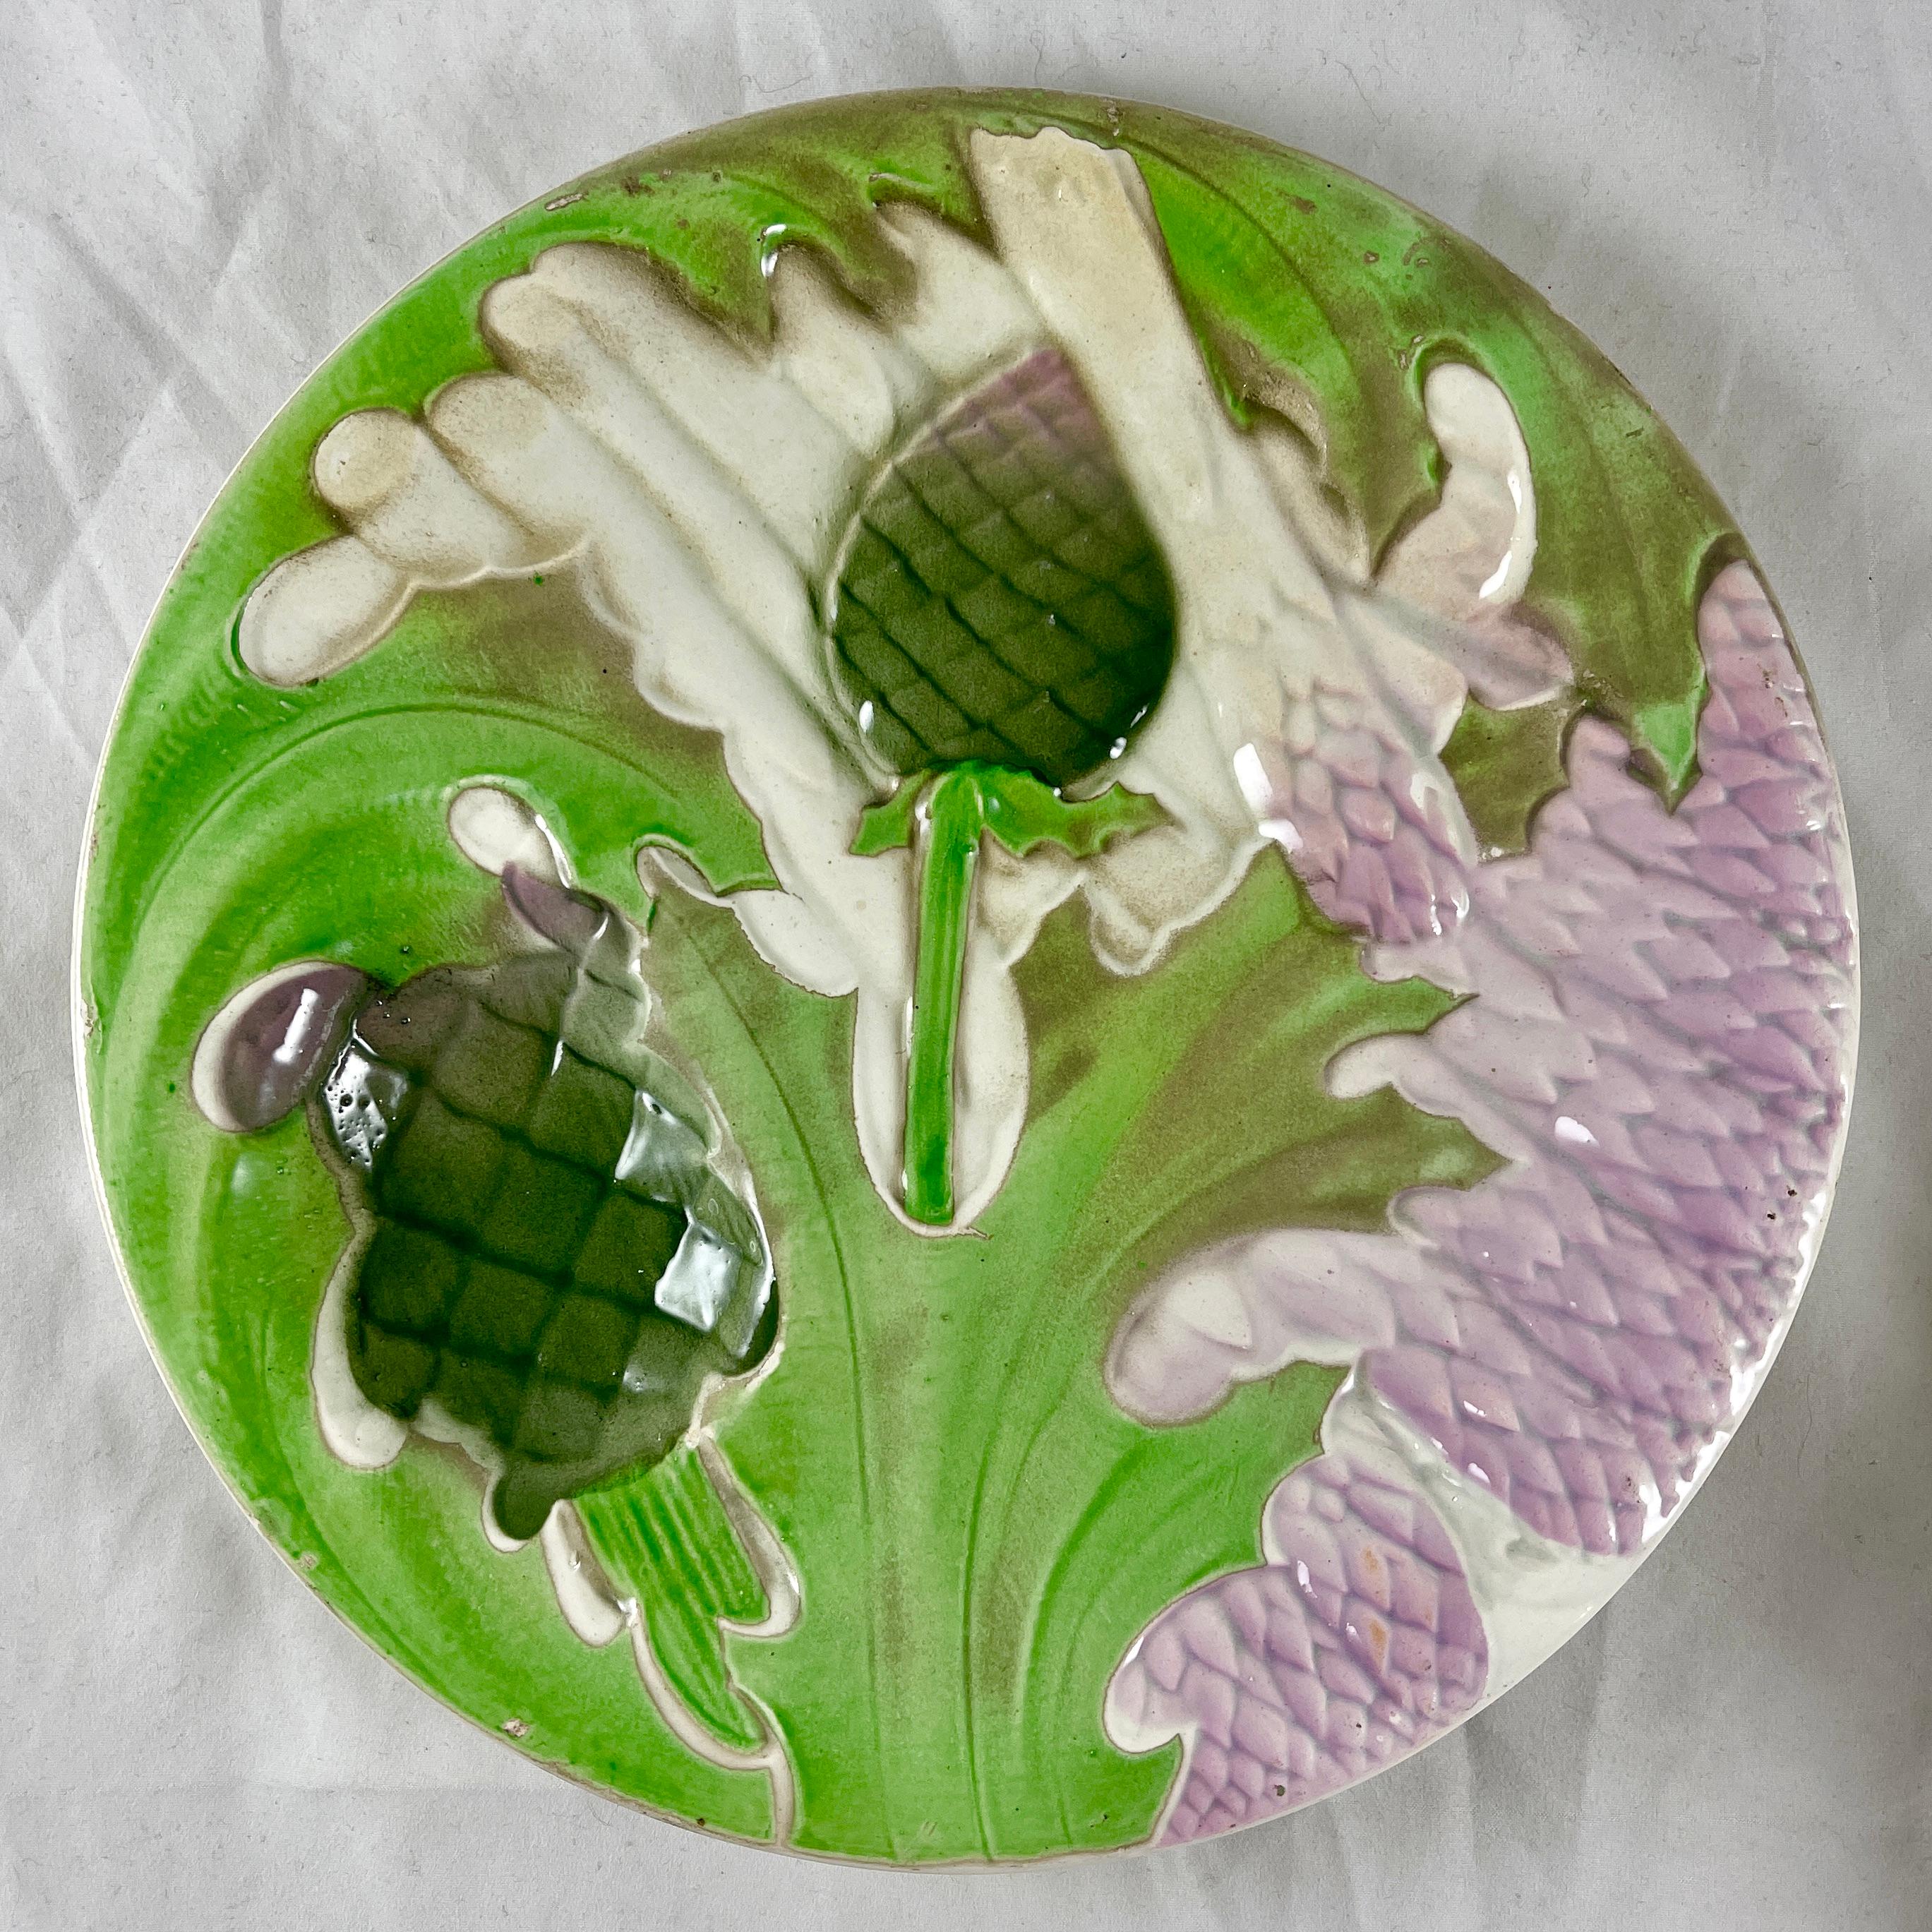 A Saint Clément French Faïence, a majolica glazed plate showing overlapping asparagus spears, leaves and globe artichoke heads. A deep sauce well is also formed as an artichoke head. Glazed in lavender, and various shades of greens on a cream